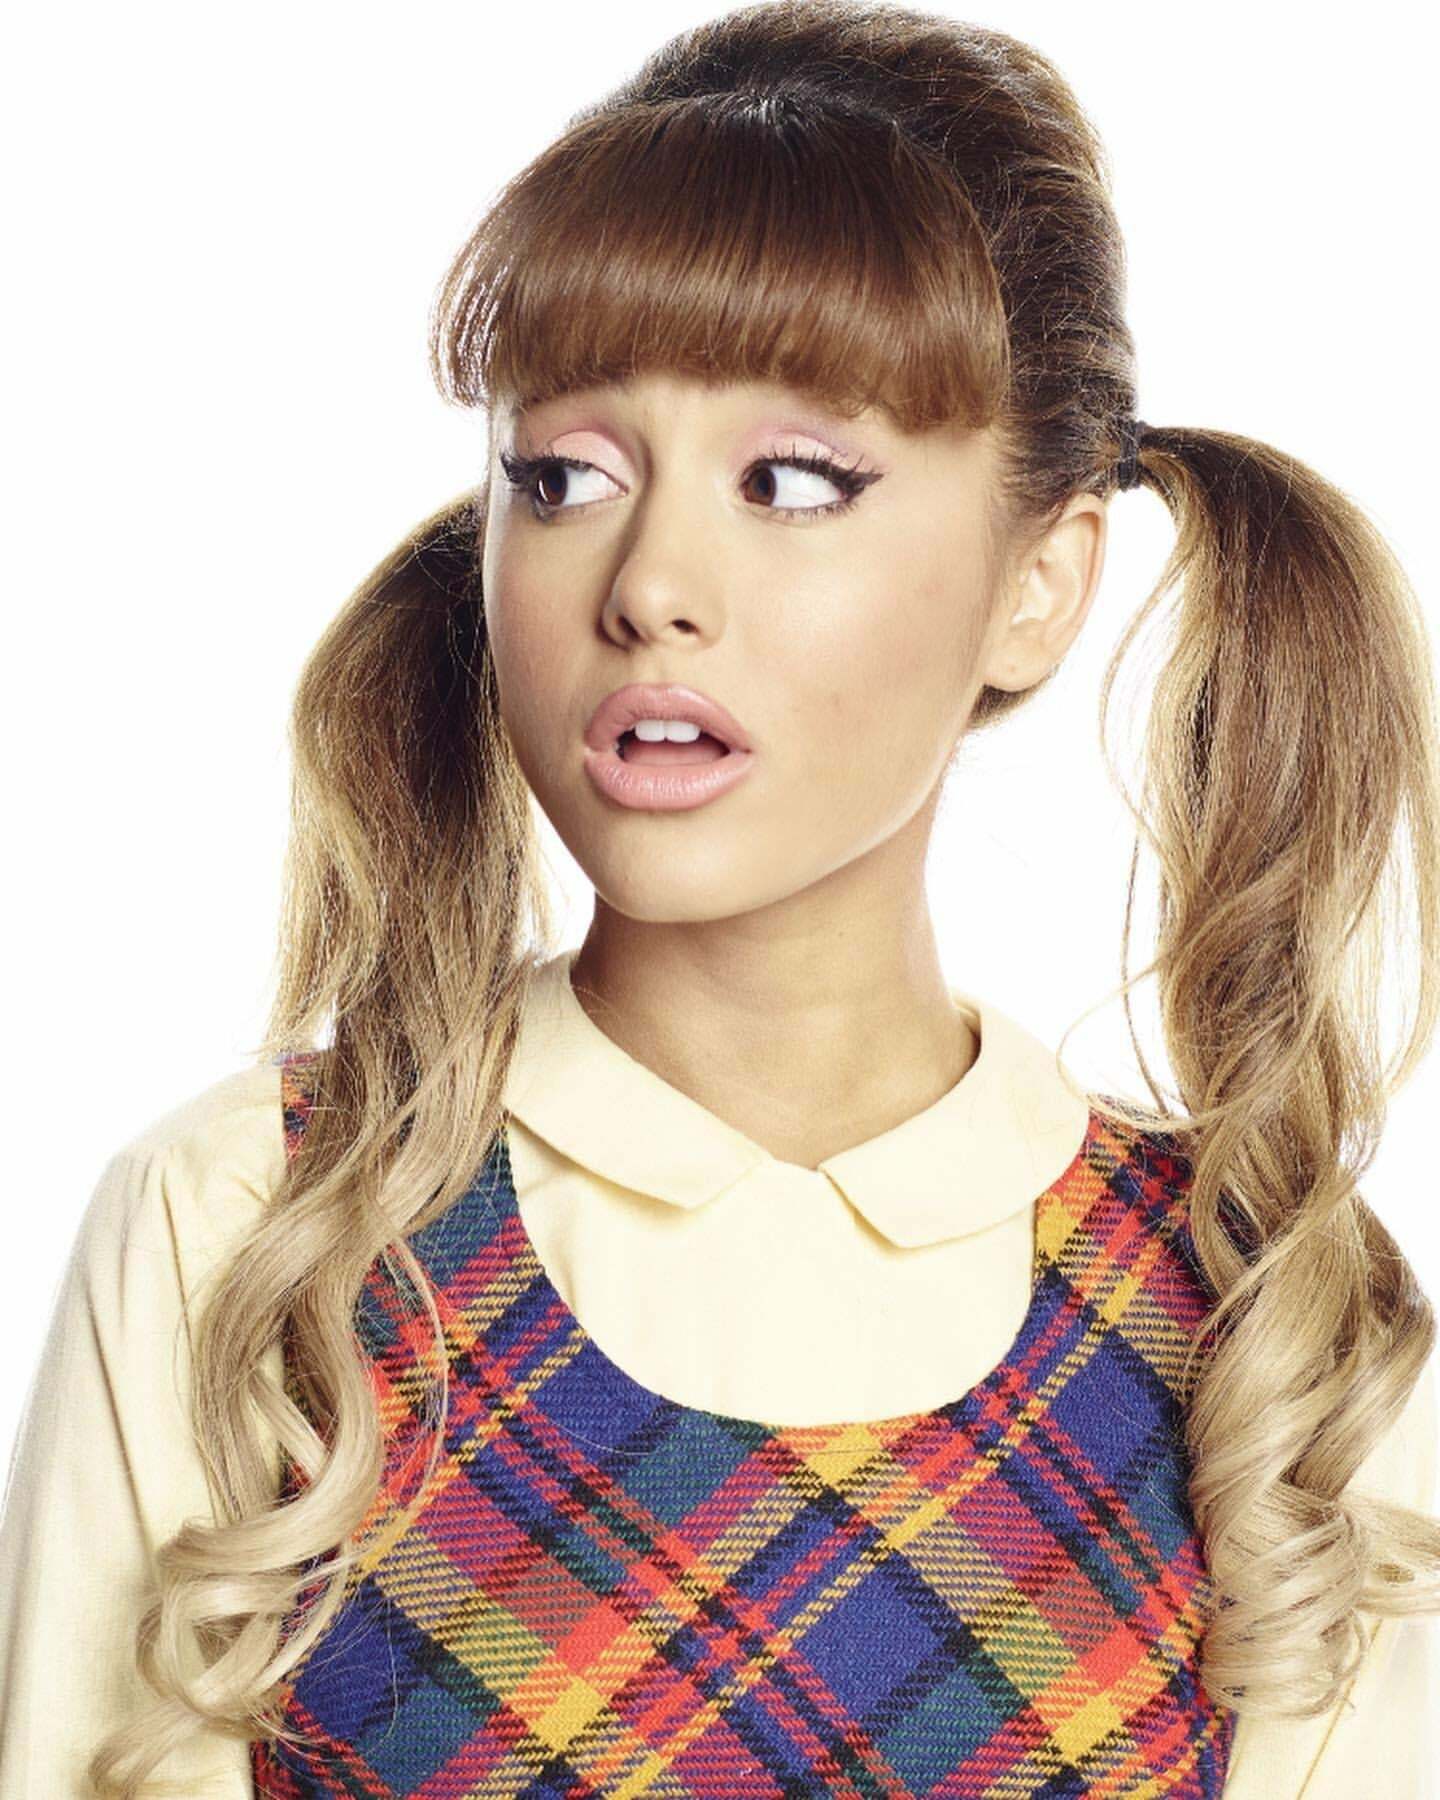 I'd love to grab those pigtails while throatfucking Ariana Grande.